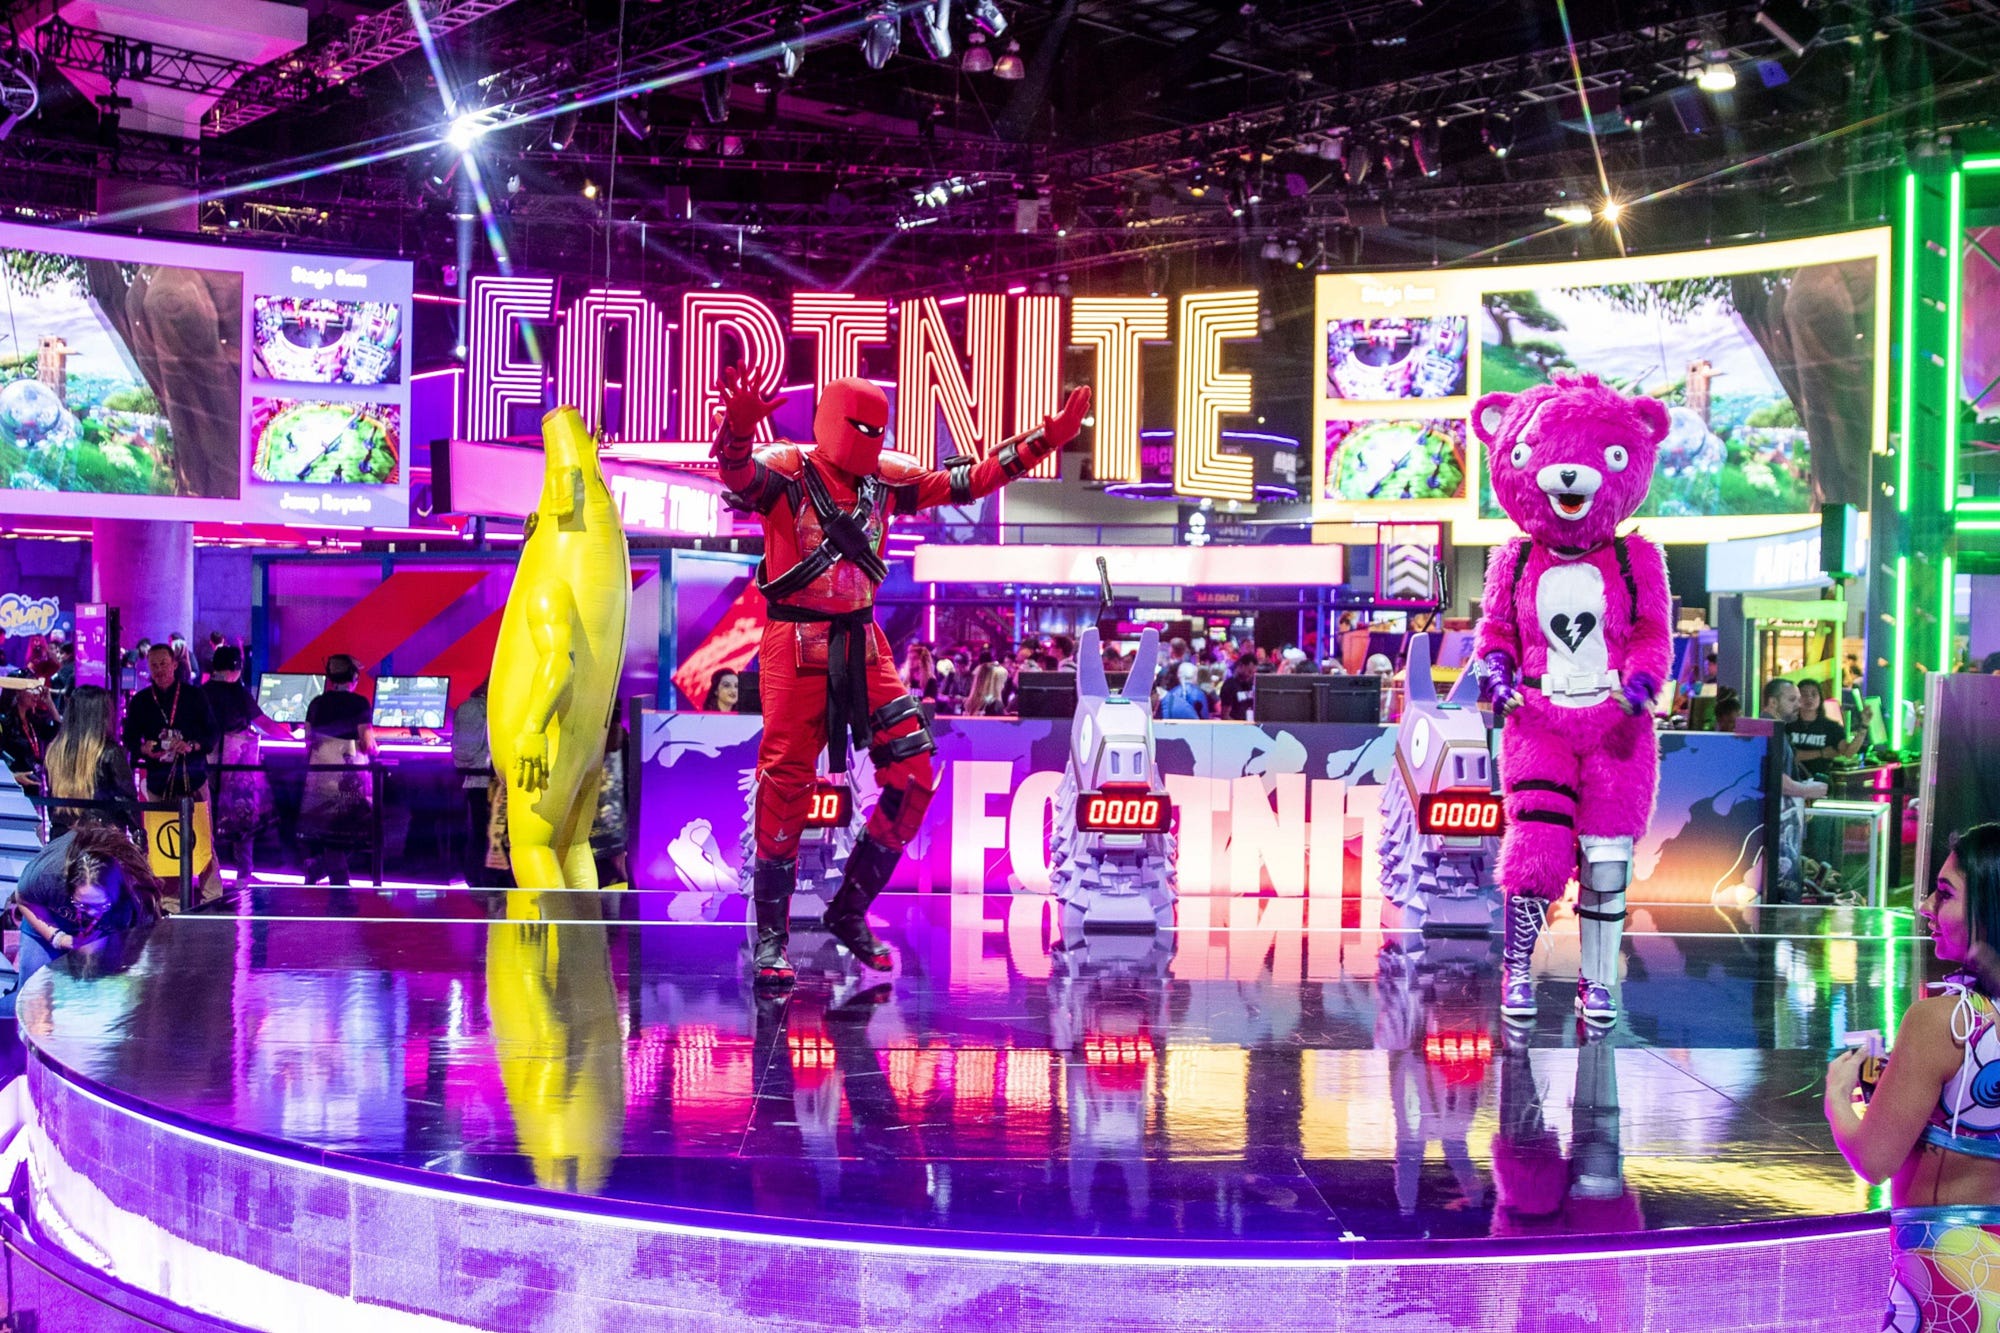 Is Fortnite the Next Great Esport?, by Josh Bycer